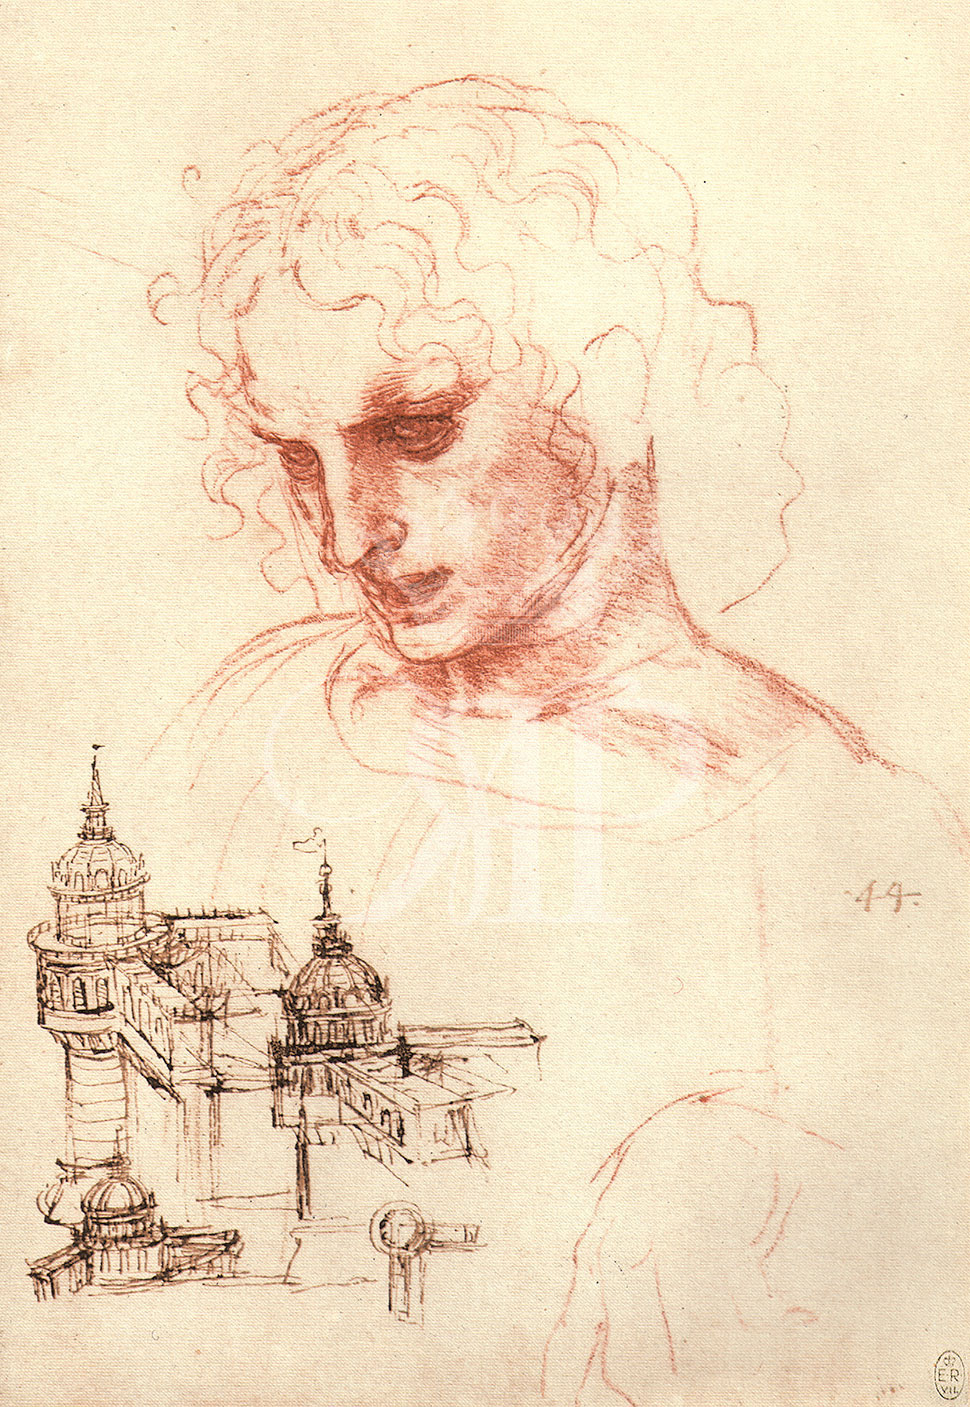 Set of two lithographic prints comprising:lithographic print of drawing by Leonardo da Vinci